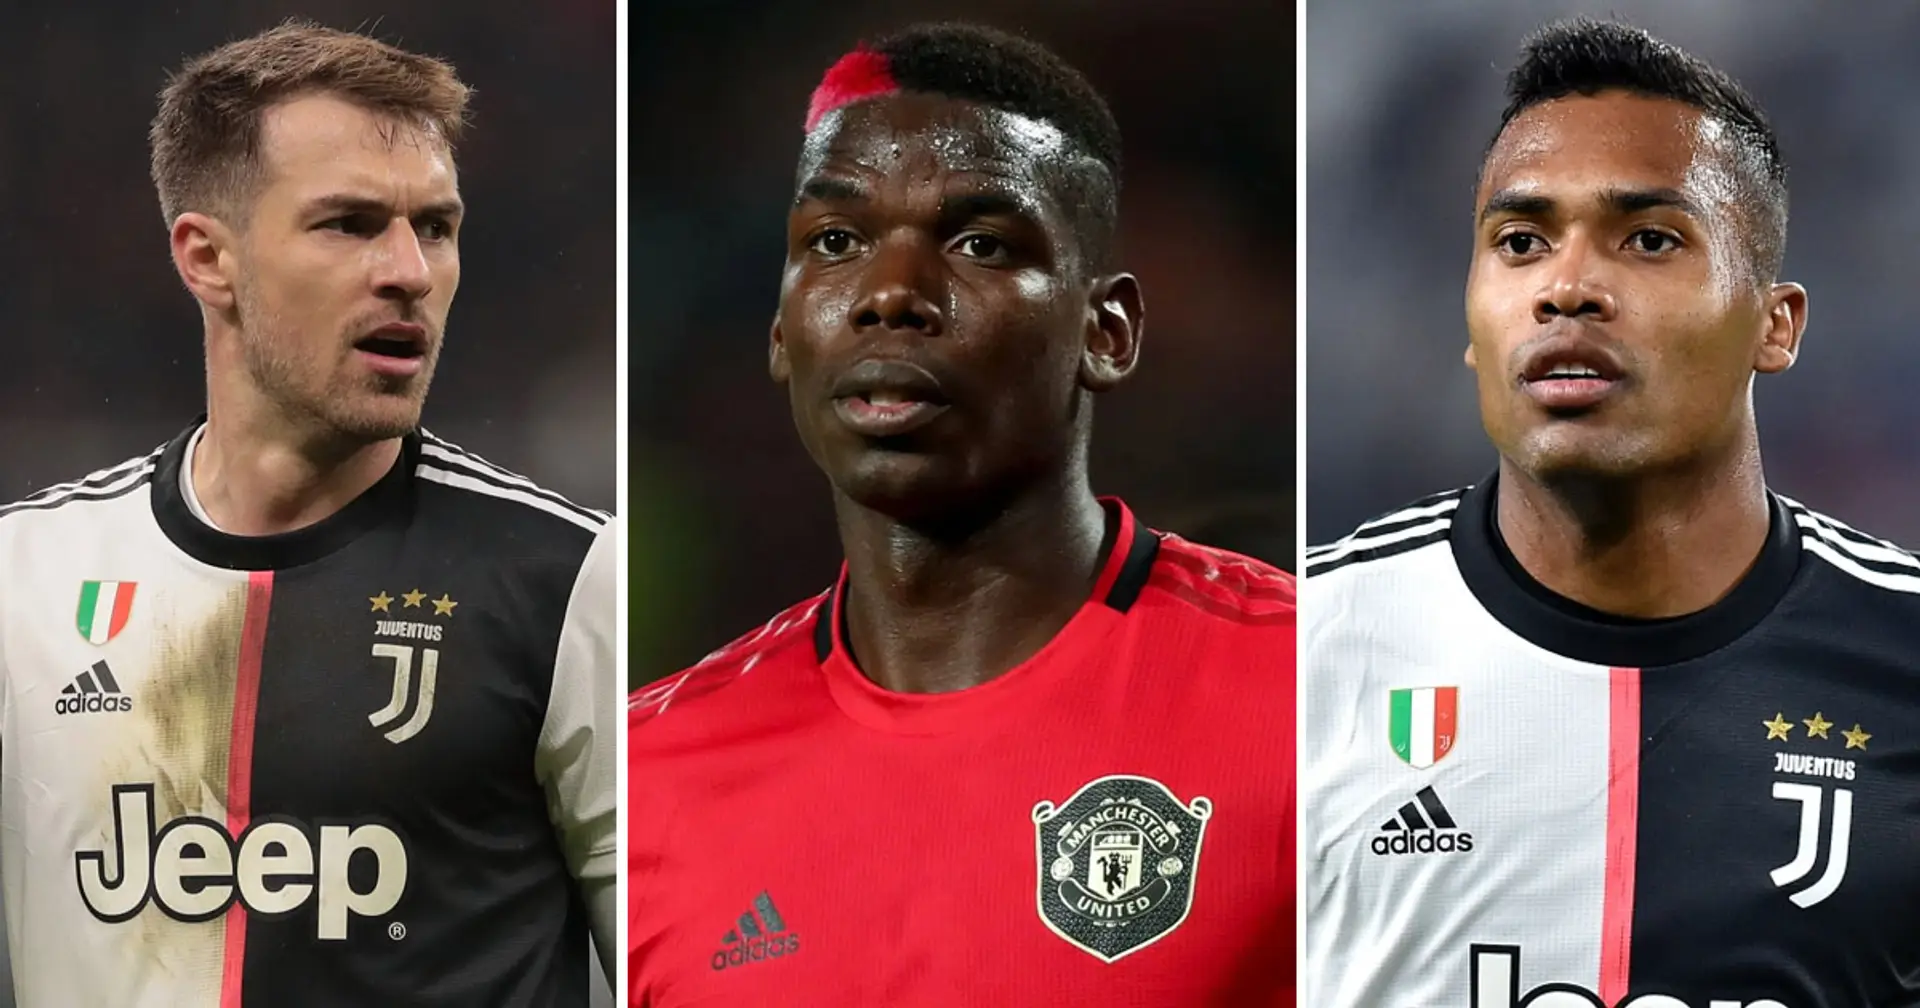 United said to have identified five Juventus players whom they could potentially include in Pogba swap